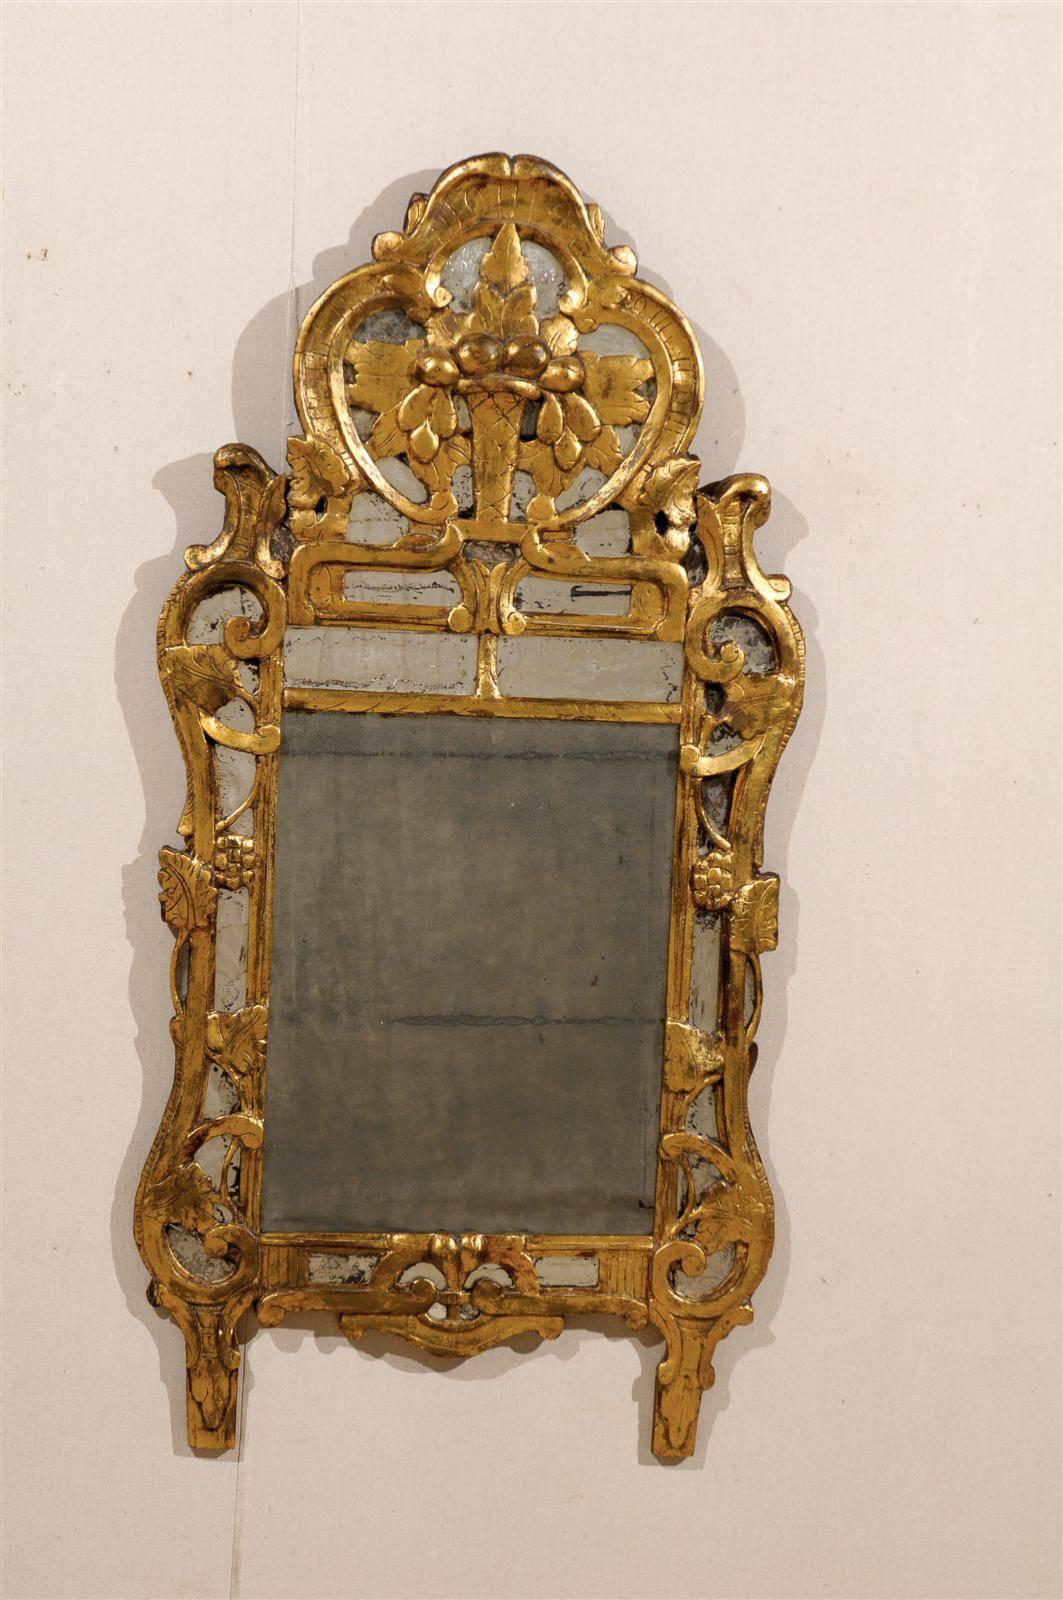 A French Early 19th Century Giltwood Rococo Style Mirror.

This French mirror is adorned with a vase and floral carving nested in a cartouche at the crest and is flanked with volutes over glass panels, intertwined with grape vines on its sides. 